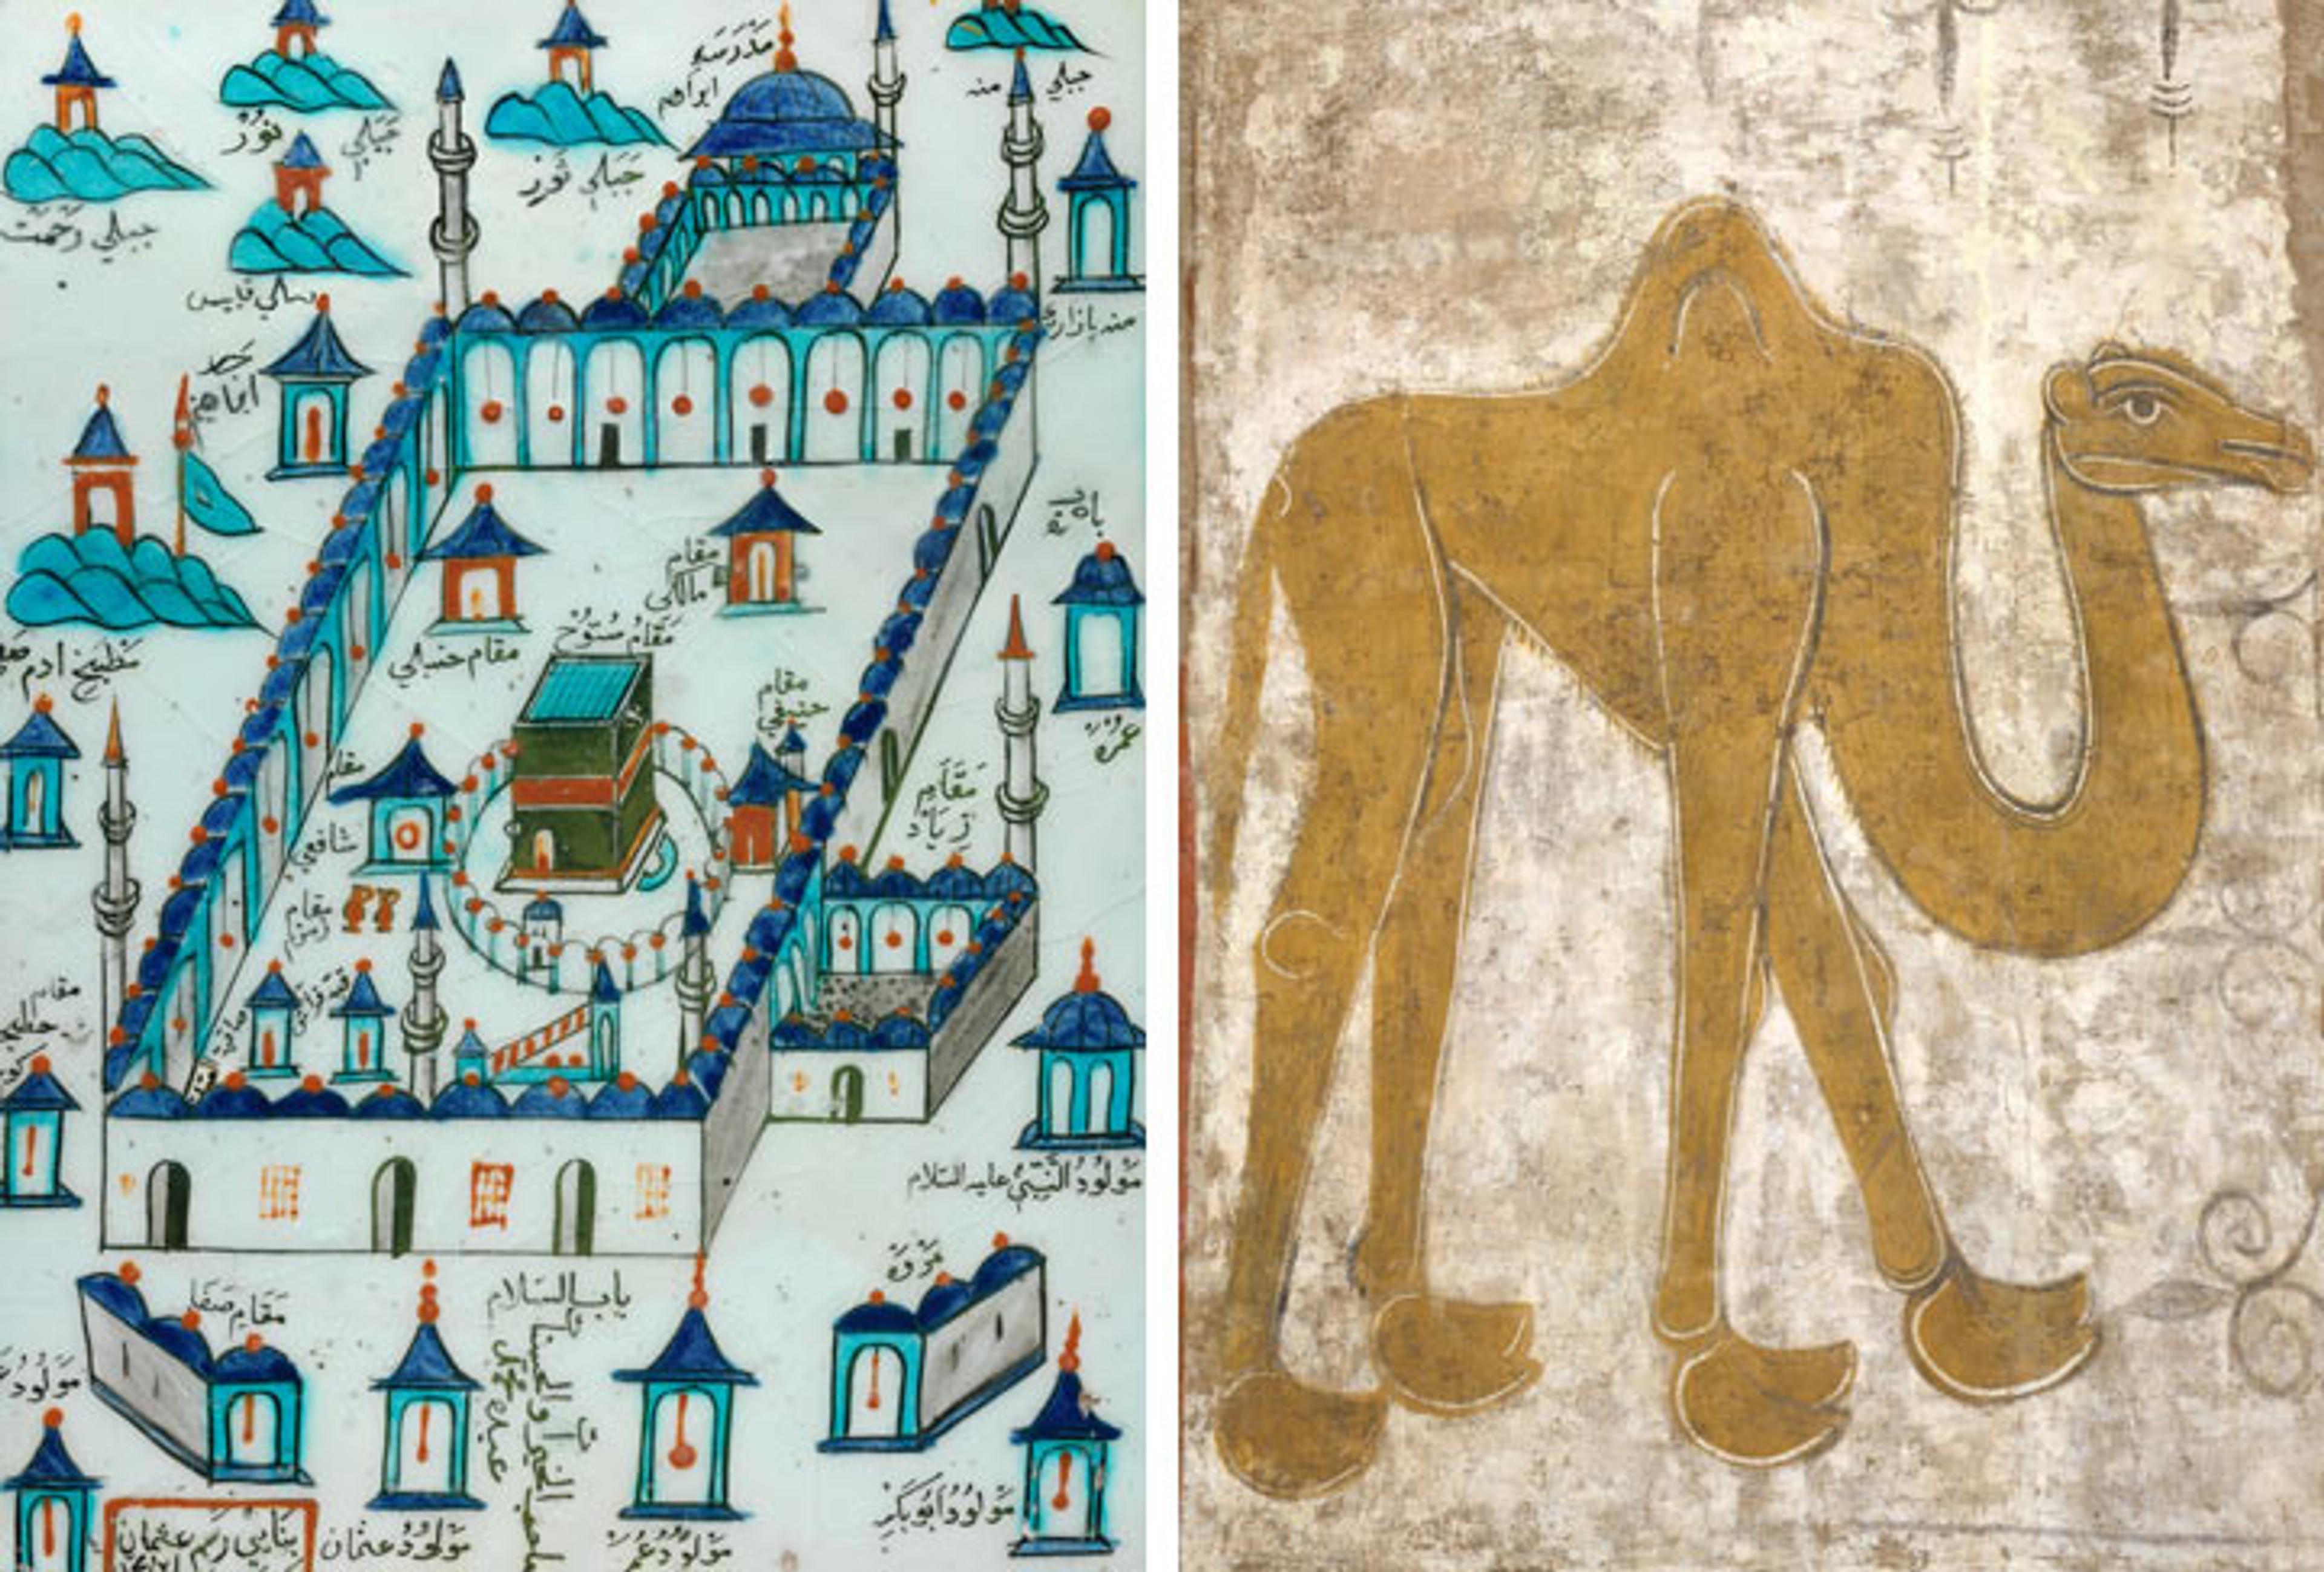 Left: A stone tile depicting the holy site of Mecca. Right: a 12th-century fresco painting of a camel